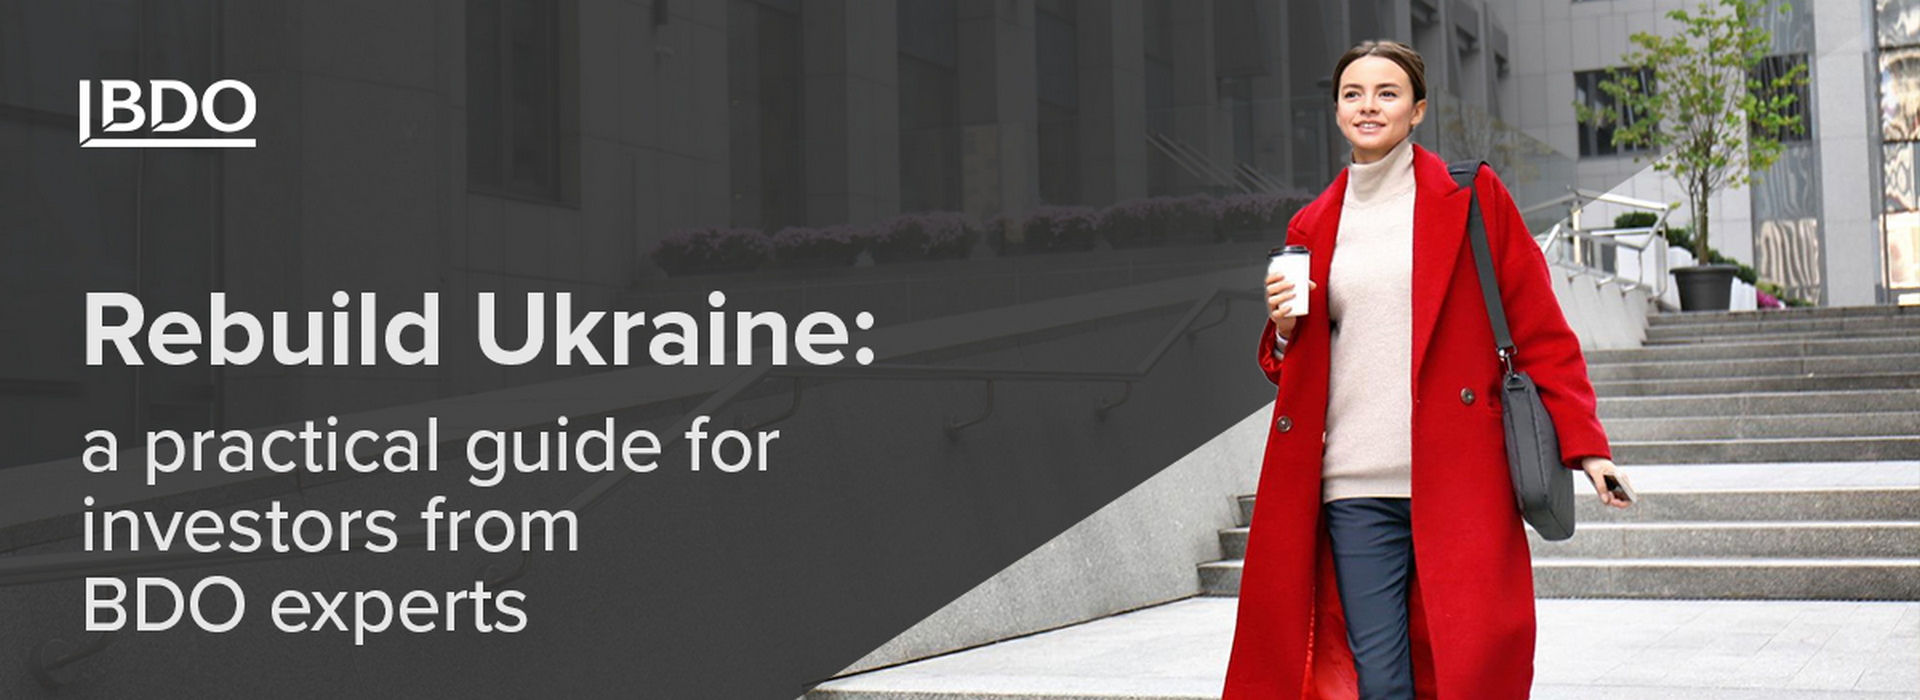 Rebuild Ukraine: a Practical Guide for Investors from BDO Experts